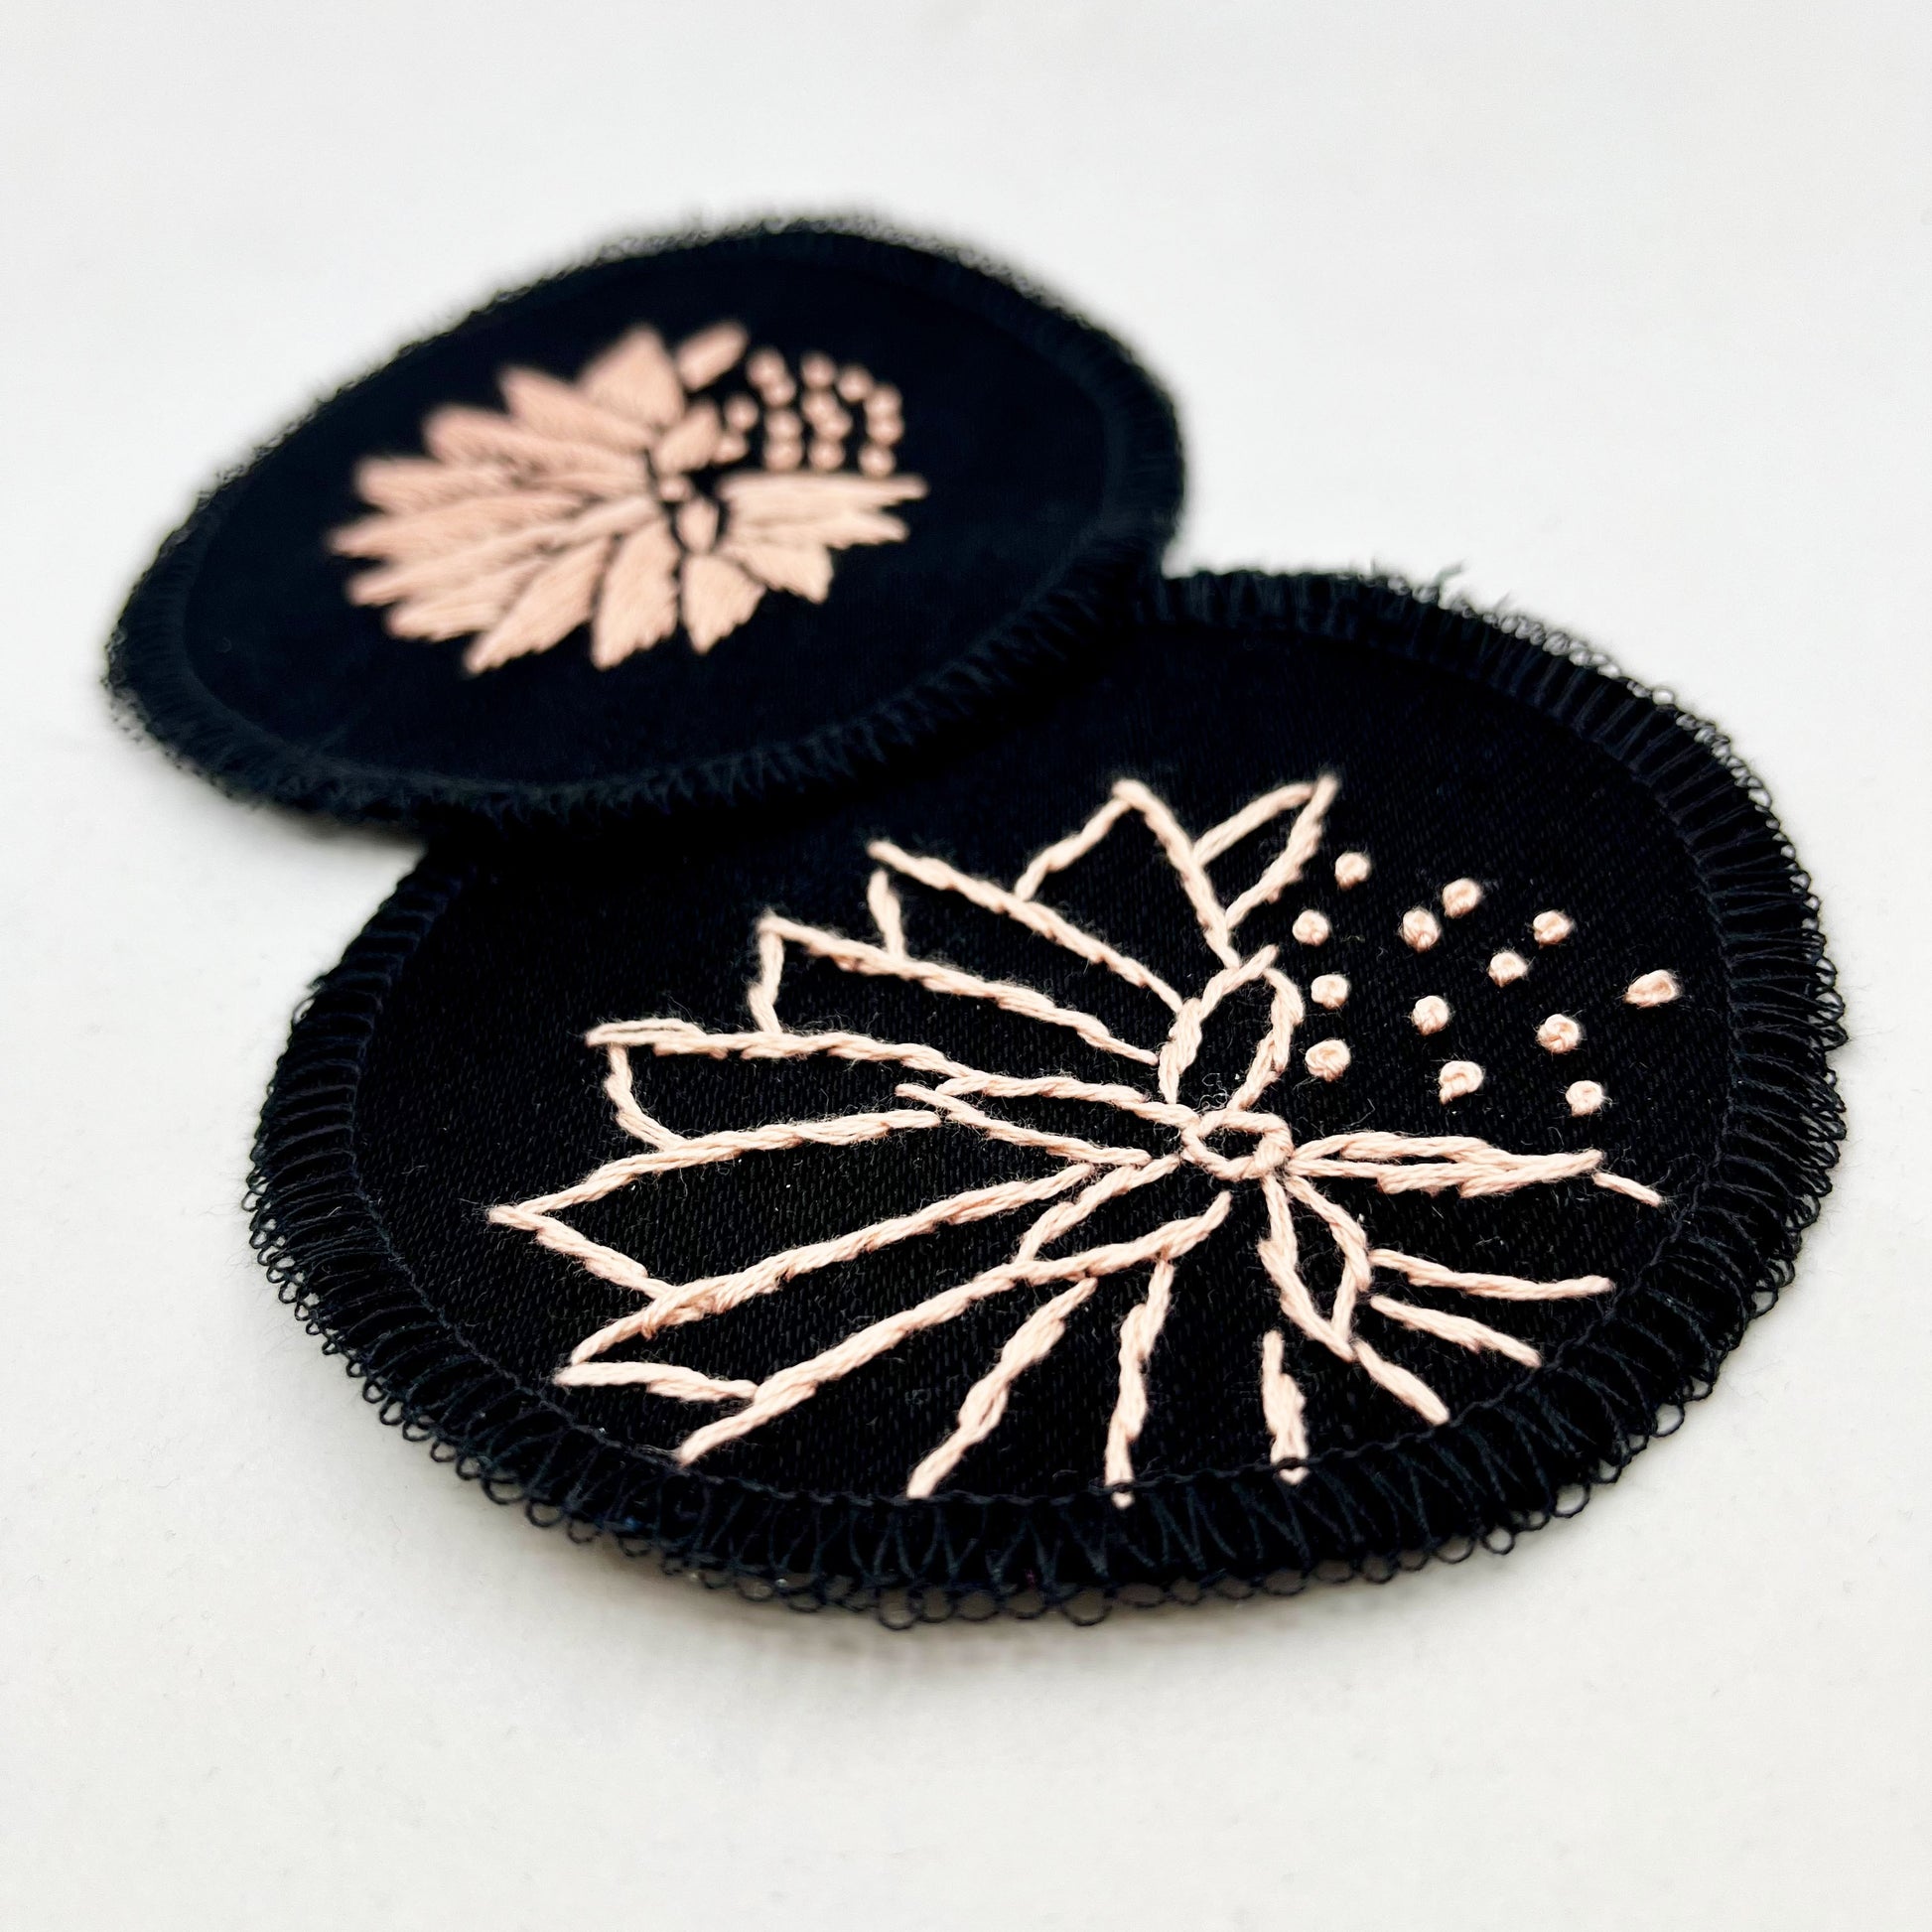 two circle shaped patches made out of black twill weave fabric, hand embroidered with abstract dandelions in peach colored floss, one with solid filled petals, the other with outlines of petals, edges overlocked in black, on a white background